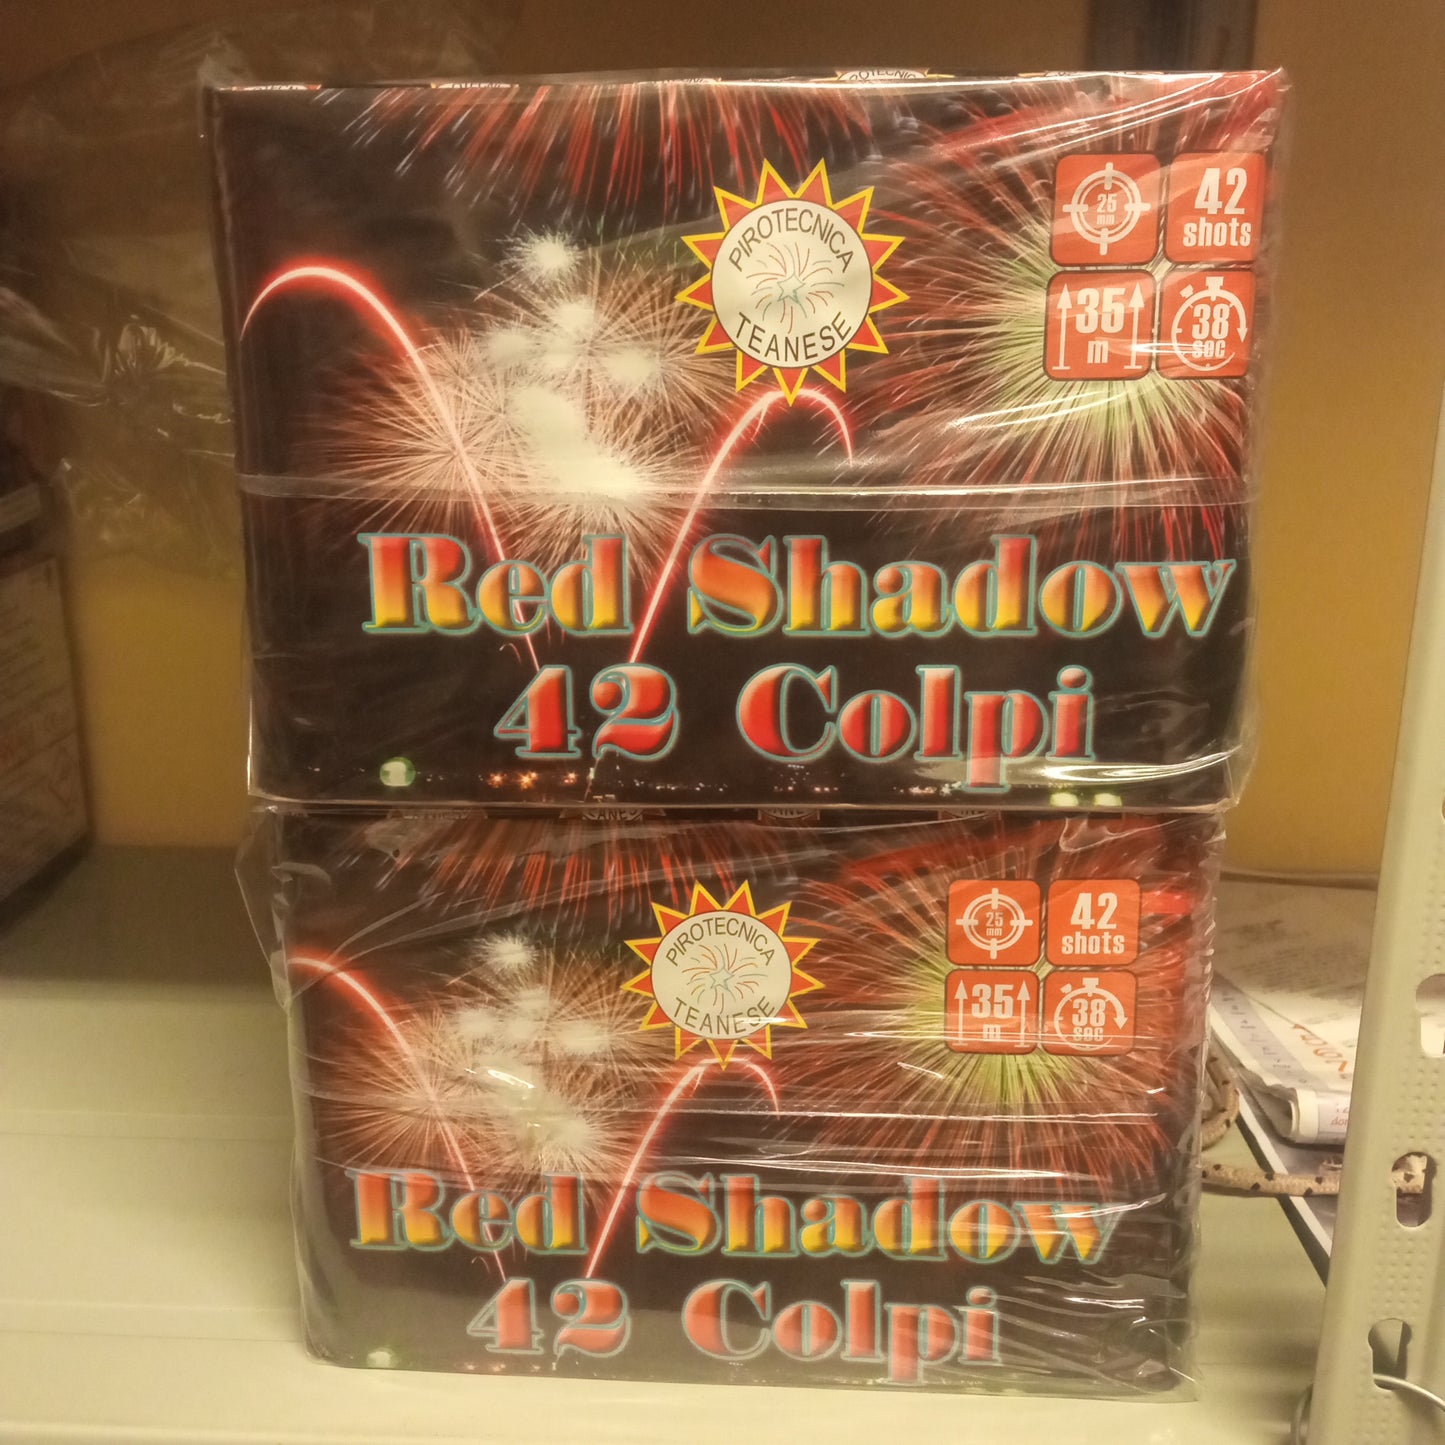 Red Shadow 42 Colpi